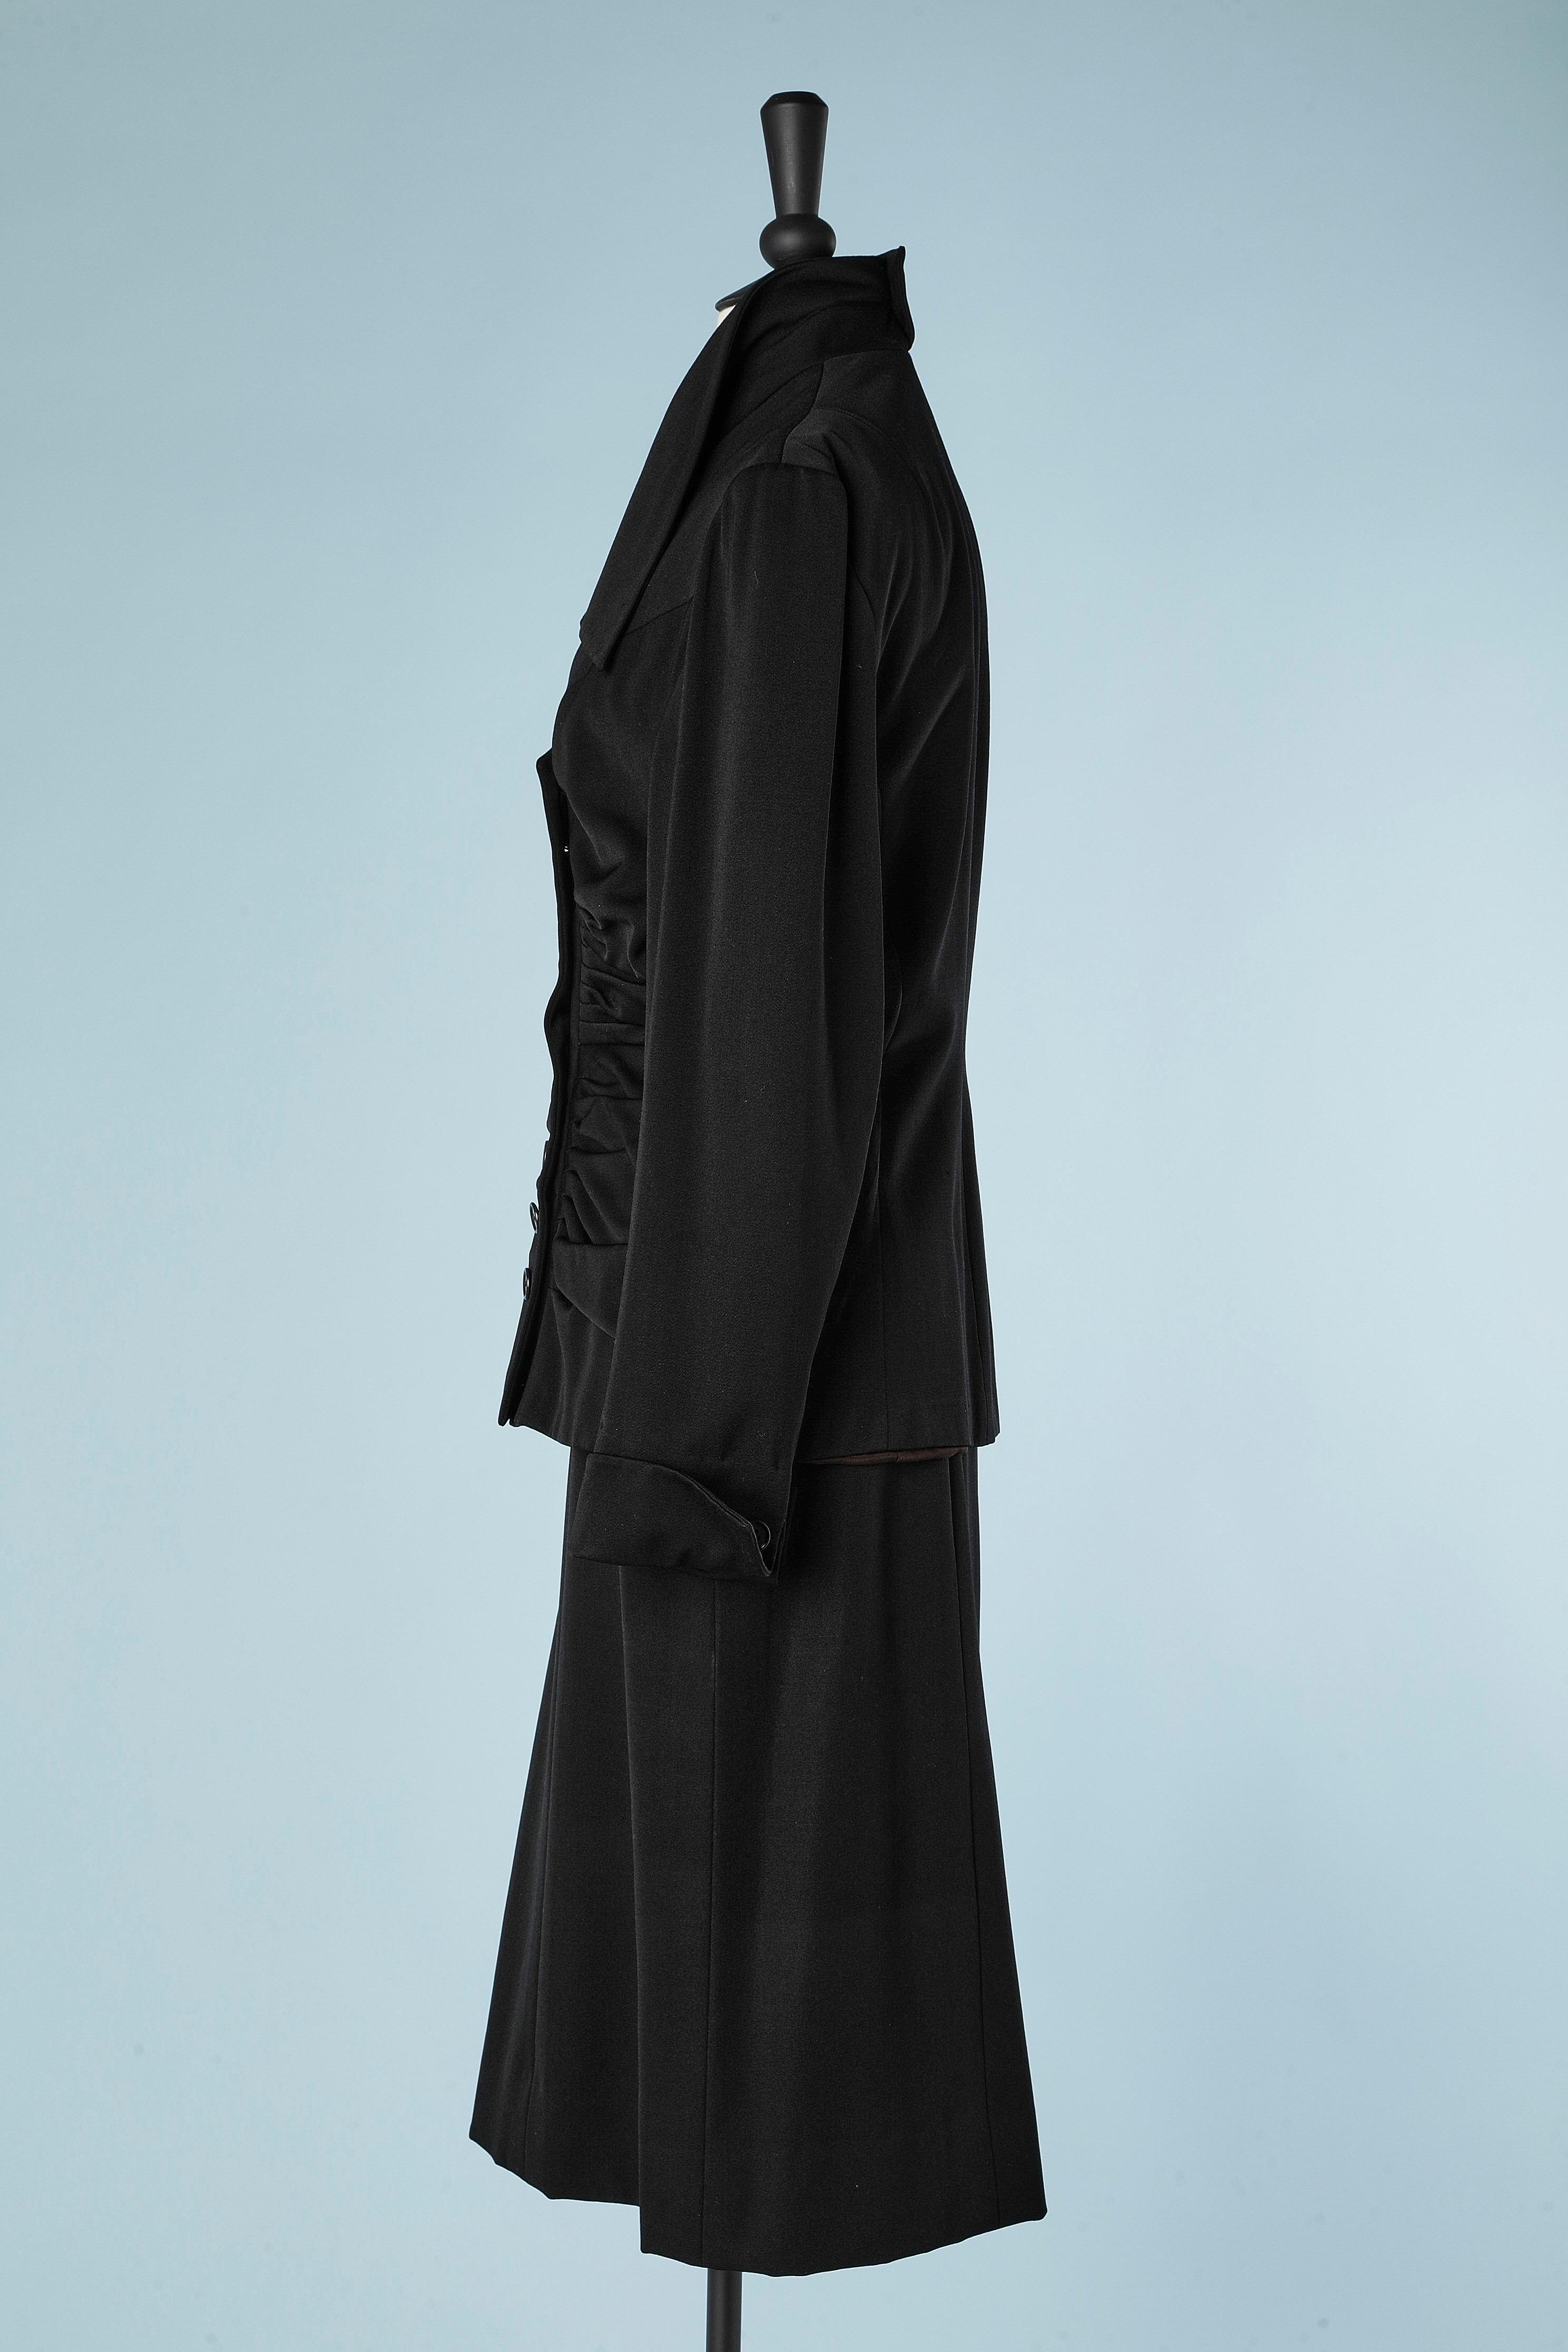 Black wool skirt-suit with double-breasted drape jacket Lilli Ann 1951  For Sale 1